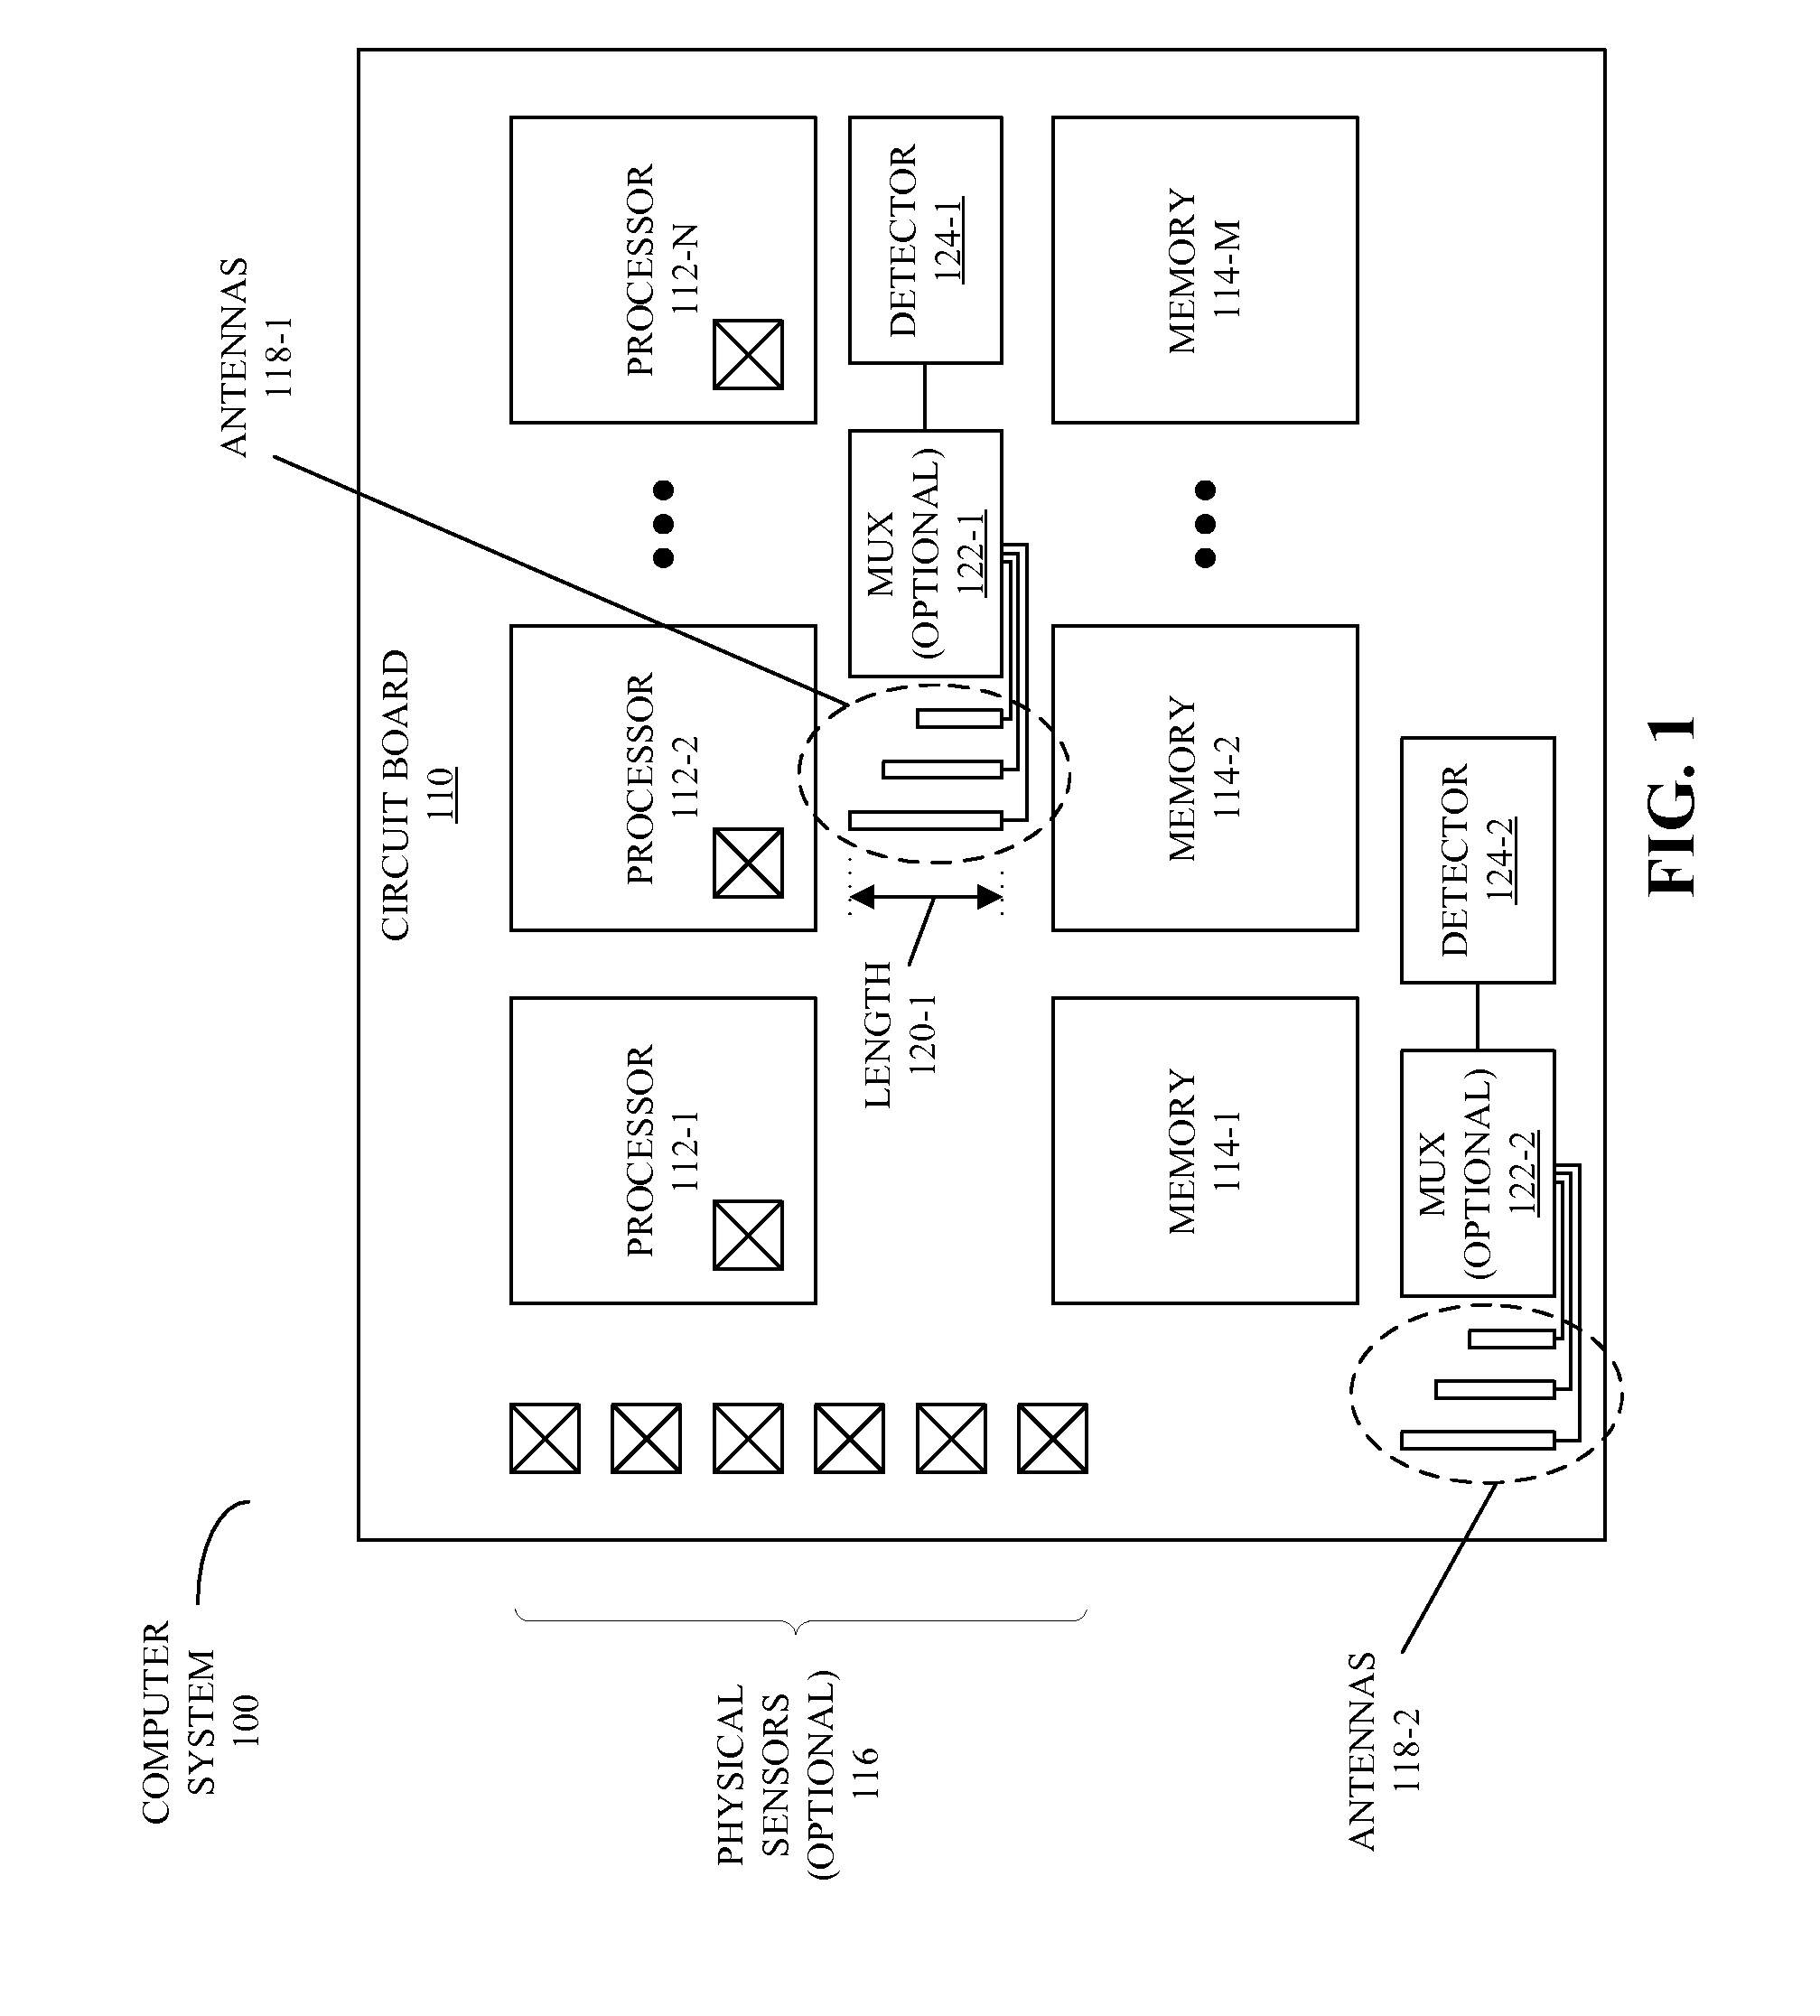 Computer system with integrated electromagnetic-interference detectors